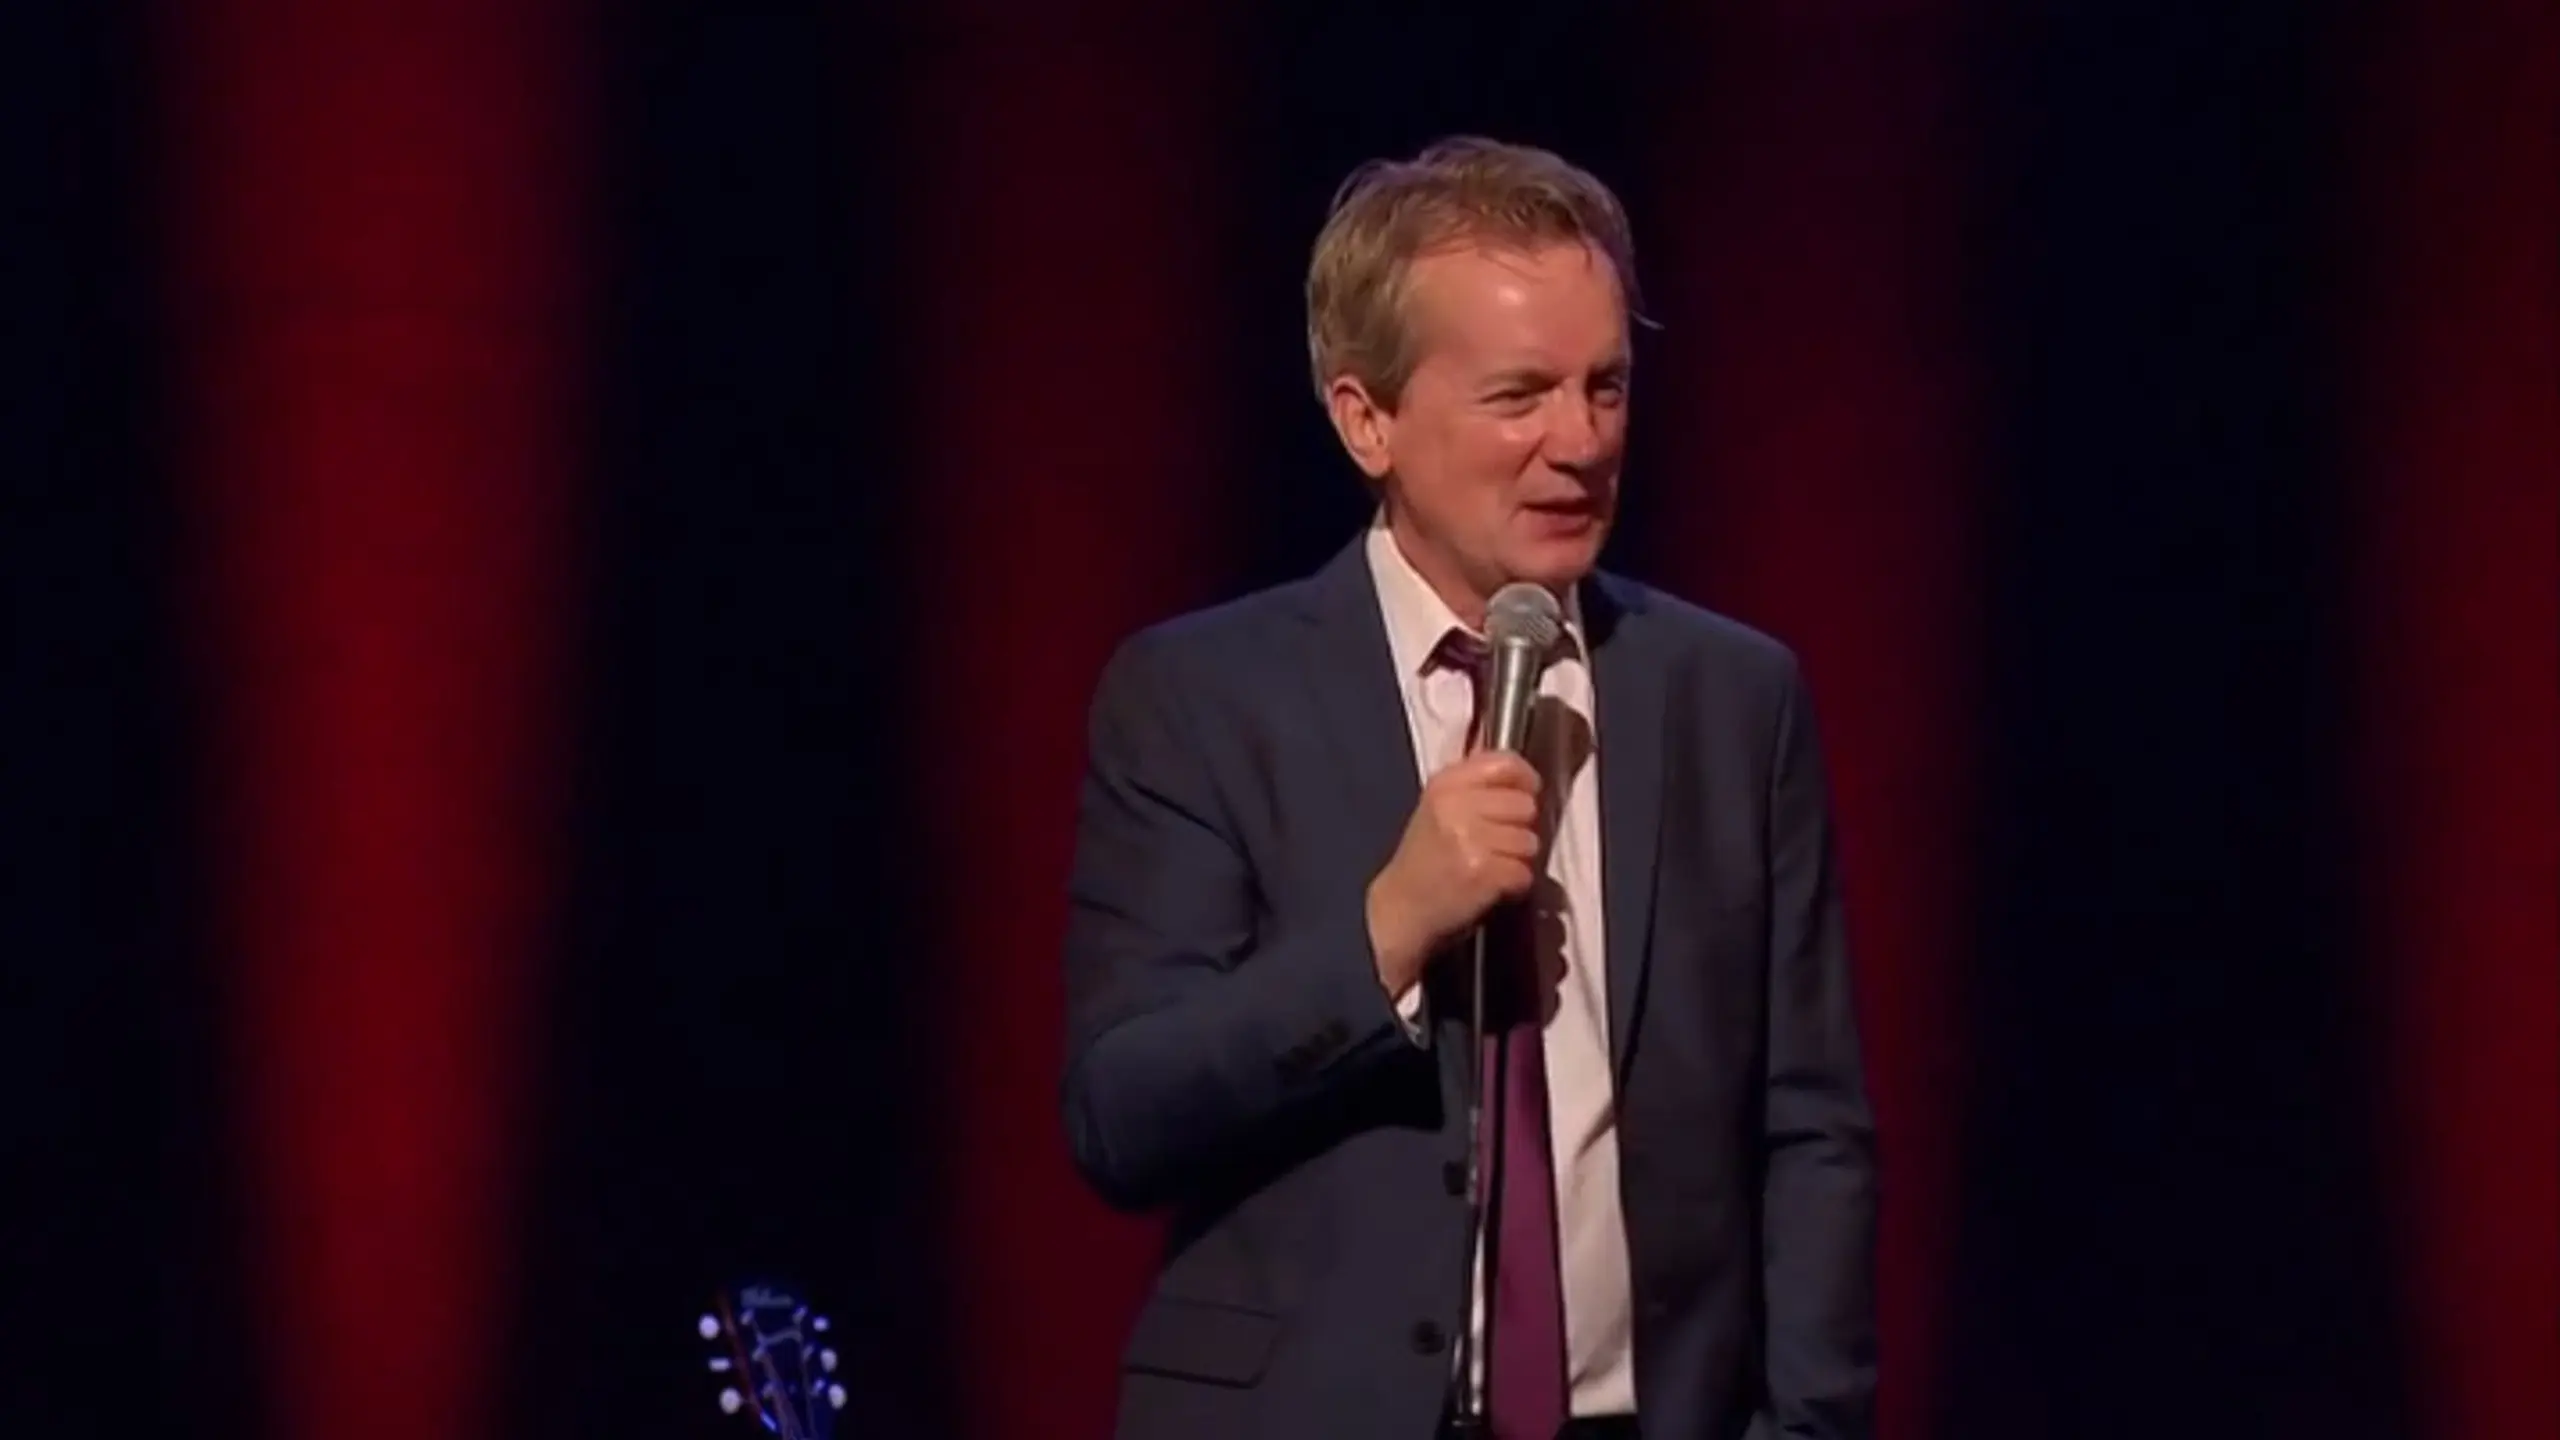 Frank Skinner Live - Man in a Suit